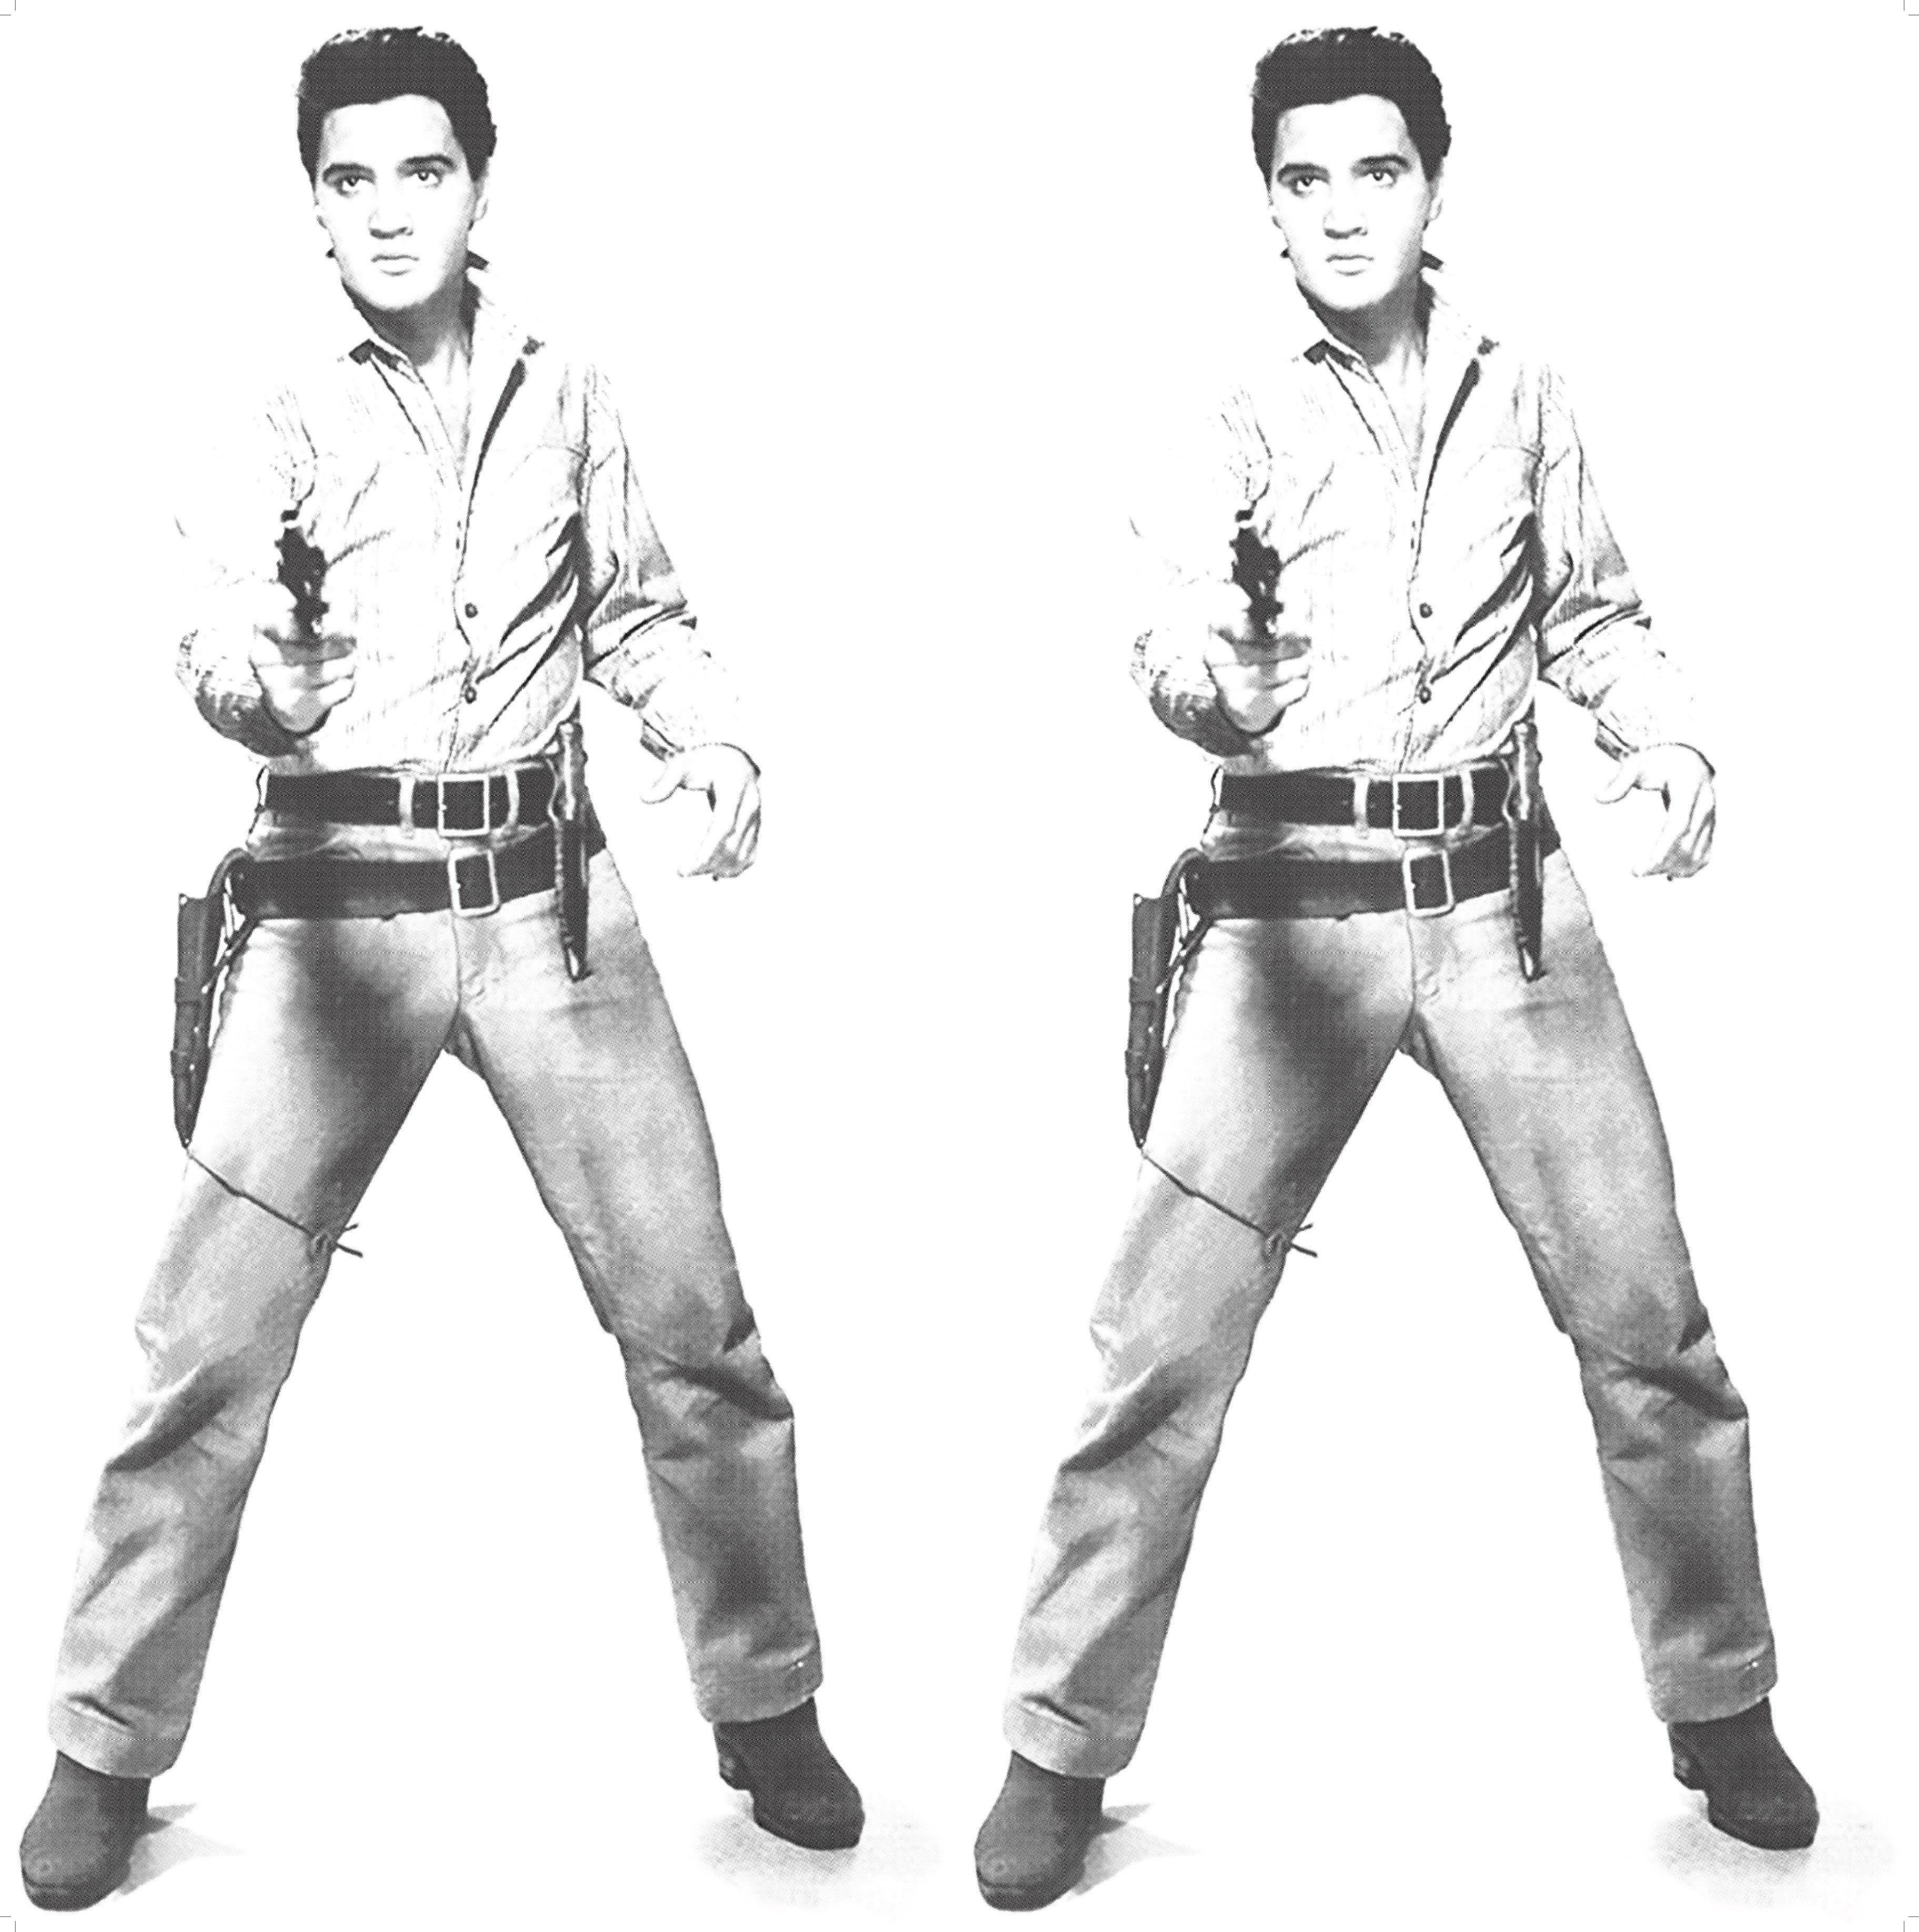 Sunday B. Morning (Andy Warhol), Double Elvis

Silkscreen print from photo negatives of original Factory Additions stencil on museum quality board. Printed with the highest quality archival inks

Edition of 3500

91.5 x 92 cm  (36 x 36 1/4